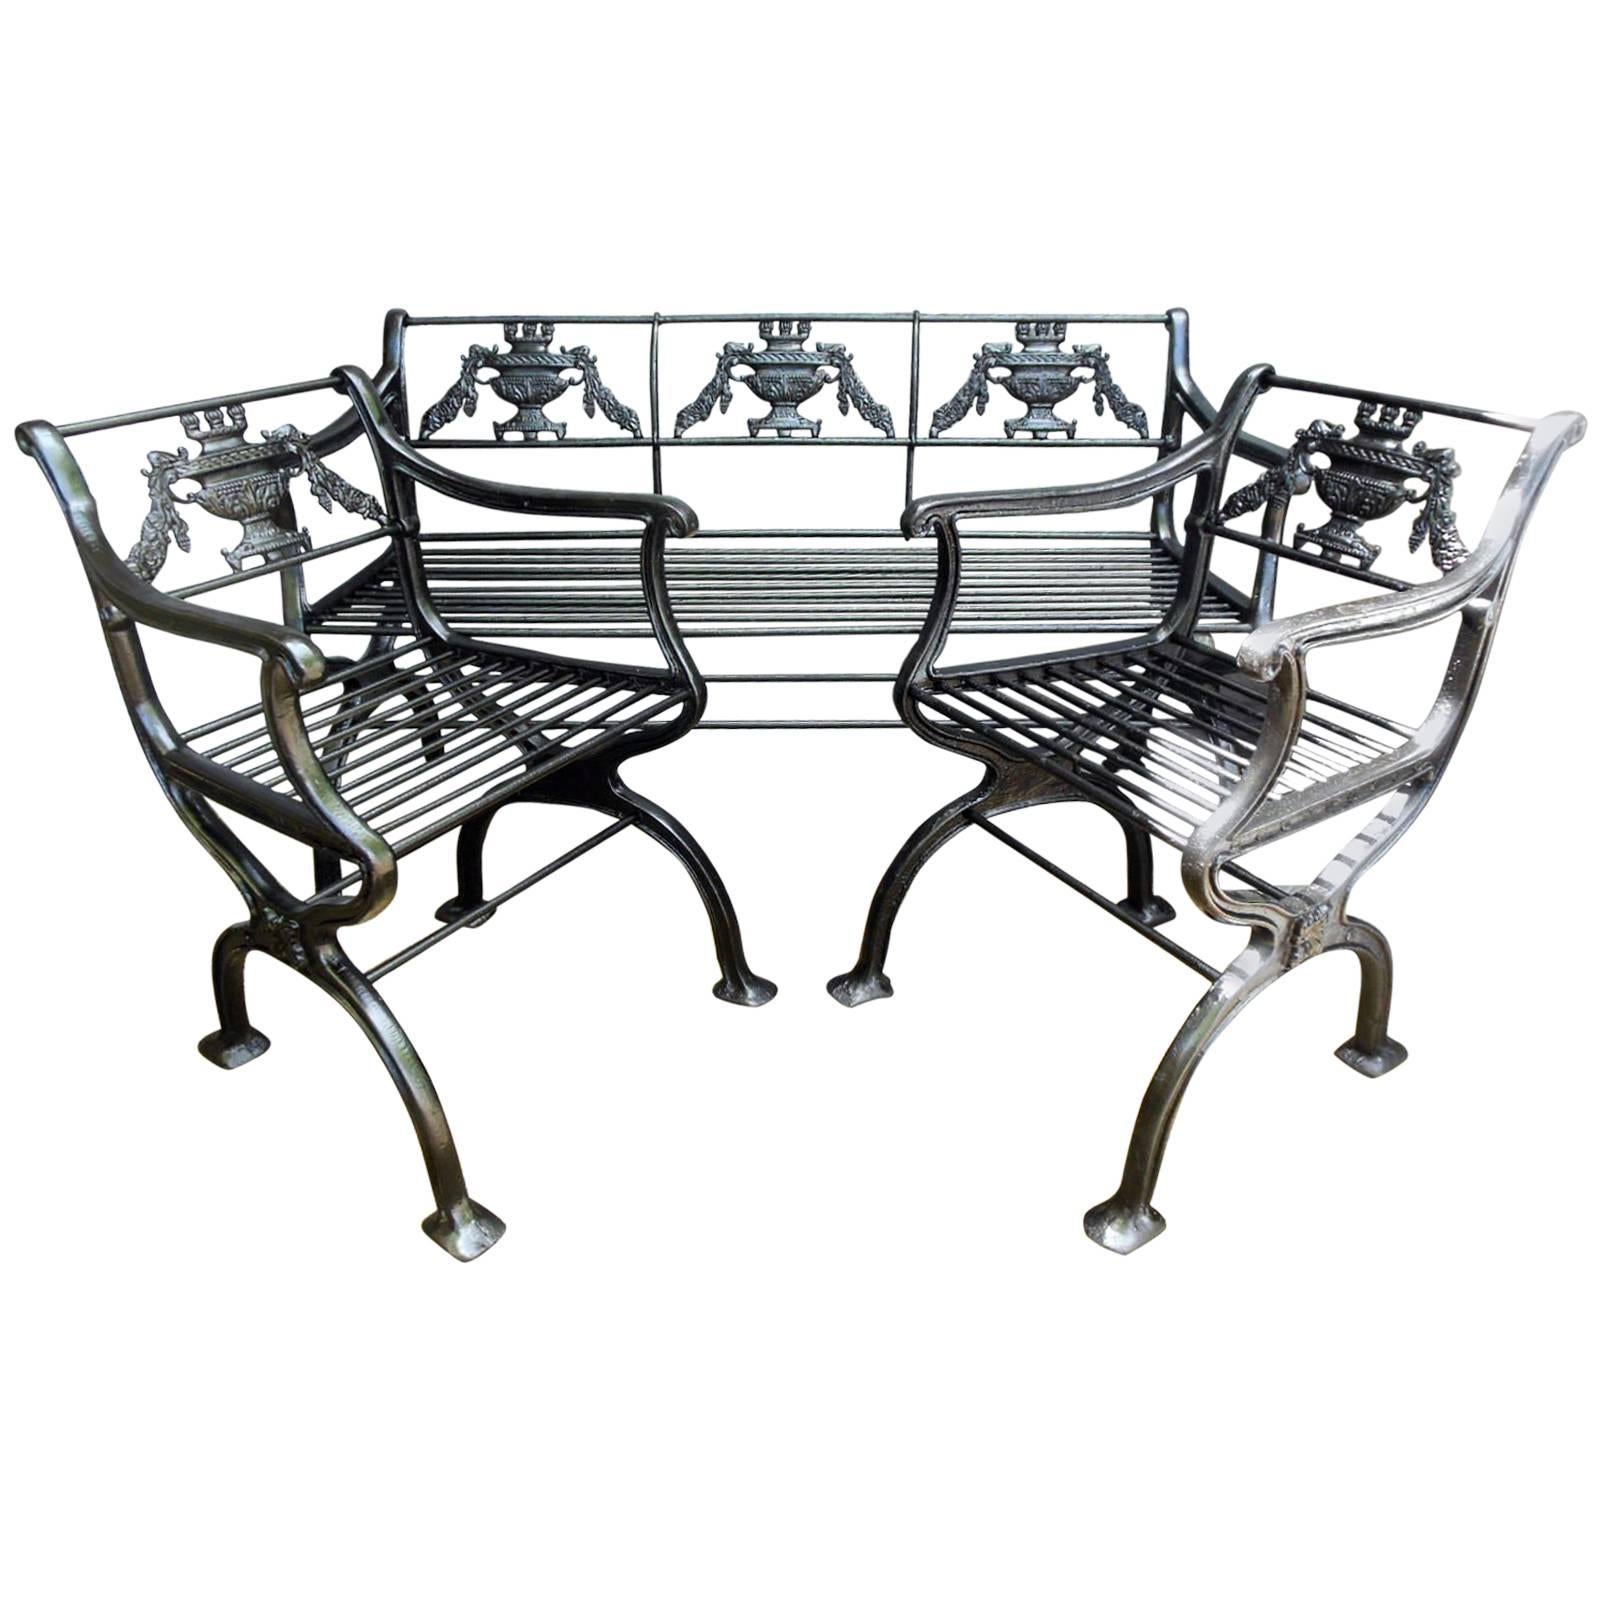 Antique Cast Iron Regency Garden Set, Bench and Chairs